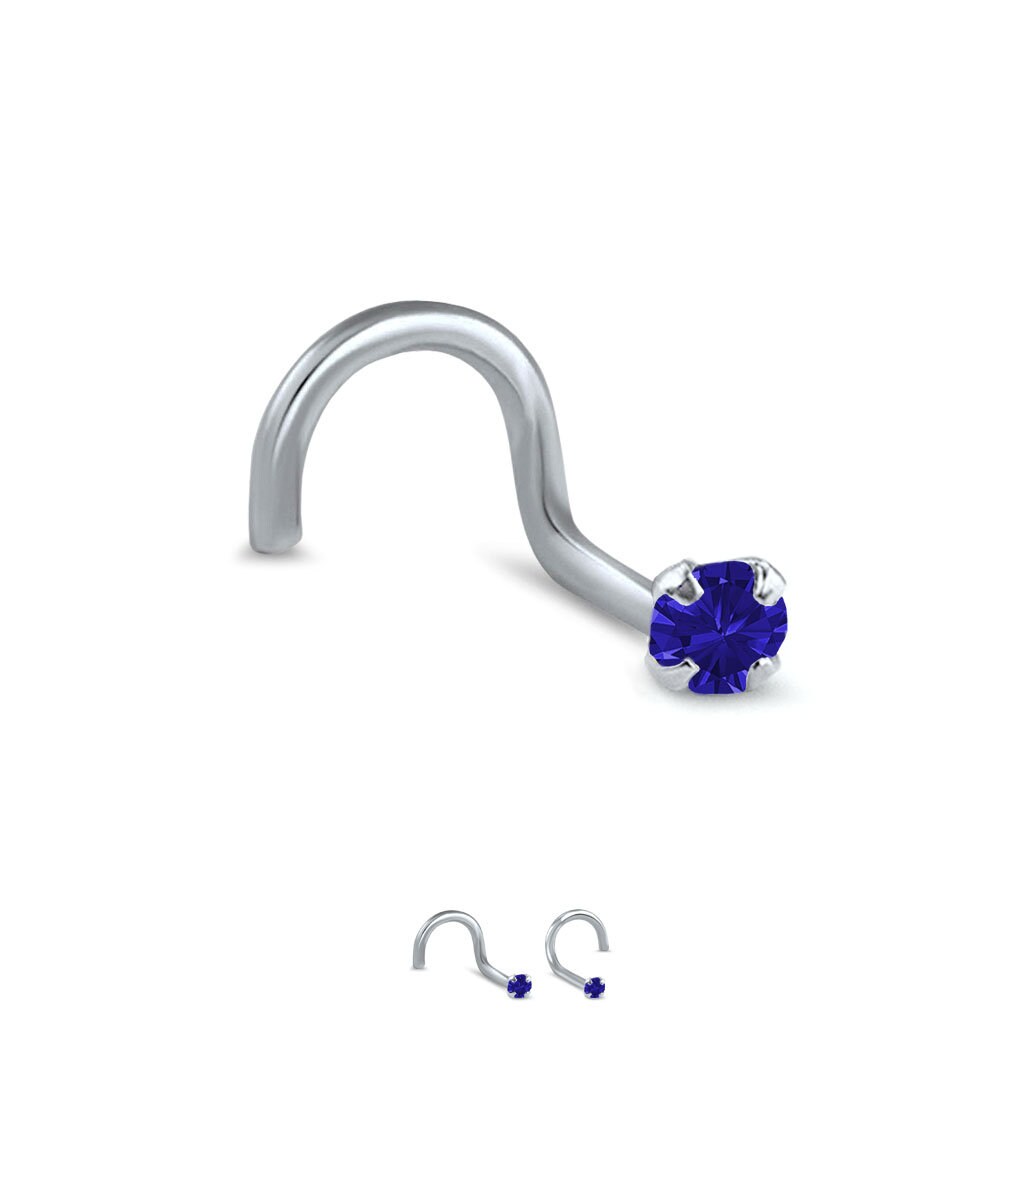 Surgical Steel Nose Studs Choose: Stud or Screw 0.8mm or 1mm Pack of 5 